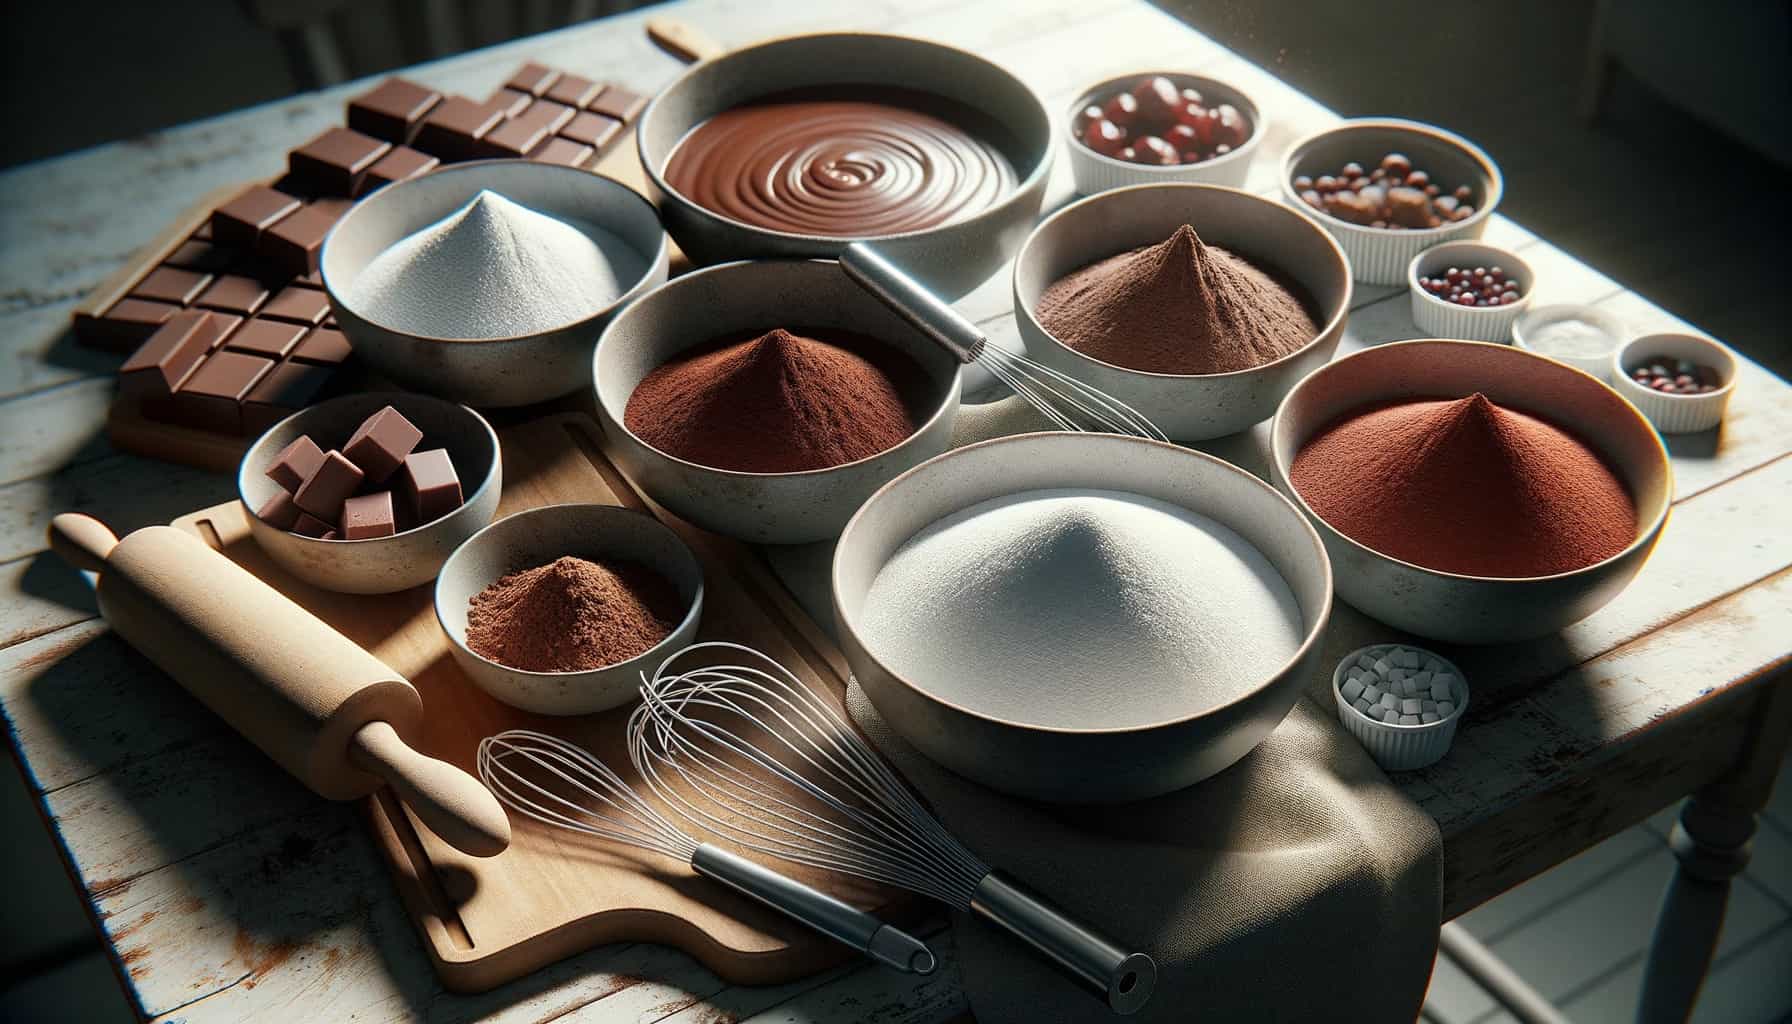 A kitchen setup where a sugar-free chocolate cake is being made. On the countertop, there are bowls containing various amounts of sweetener and cocoa powder. A whisk and a spatula are present, indicating experimentation with the mixtures.